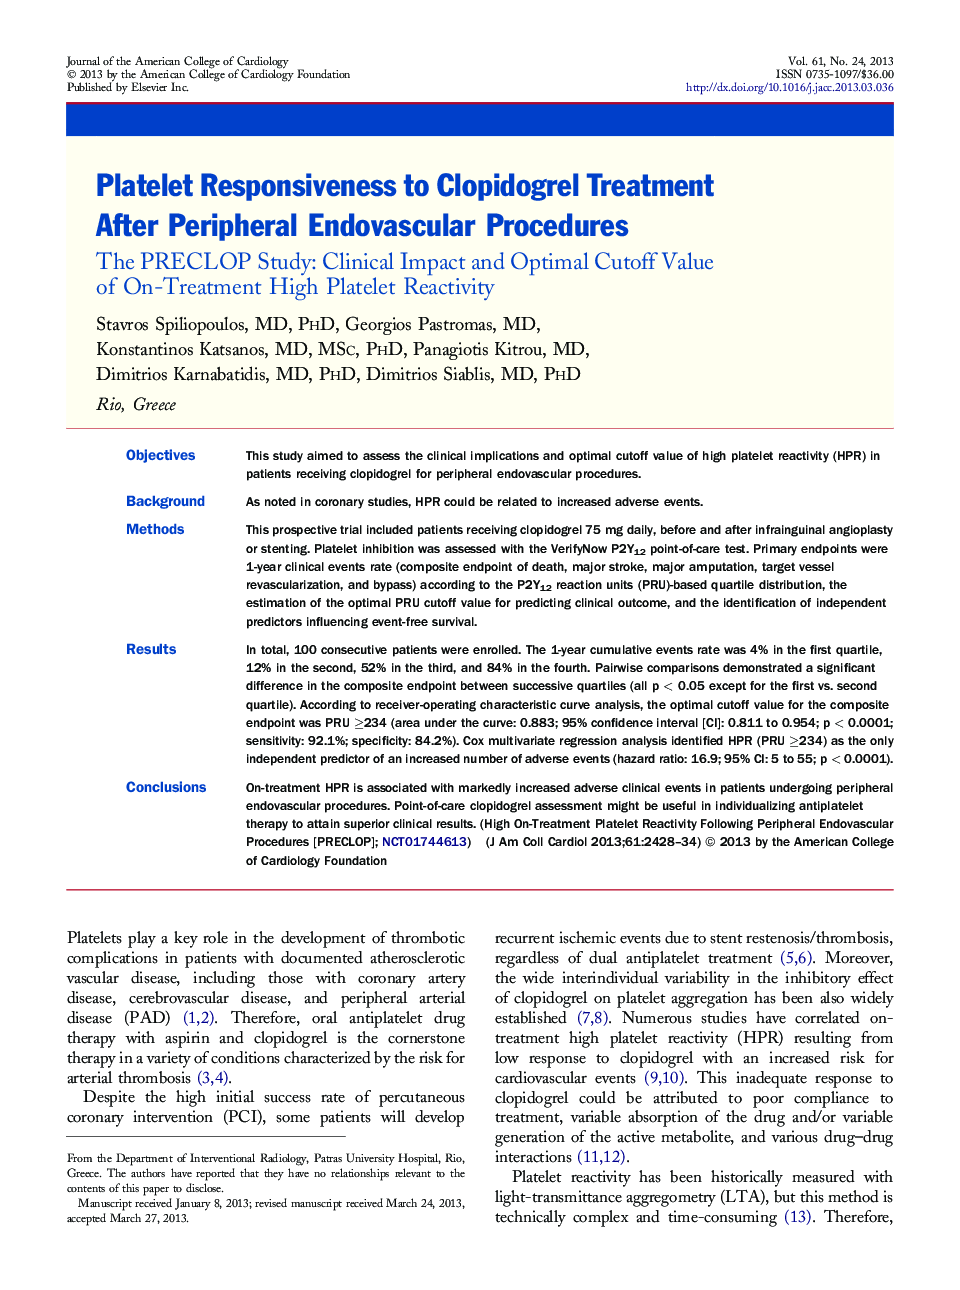 Platelet Responsiveness to Clopidogrel Treatment After Peripheral Endovascular Procedures: The PRECLOP Study: Clinical Impact and Optimal Cutoff Value of On-Treatment High Platelet Reactivity